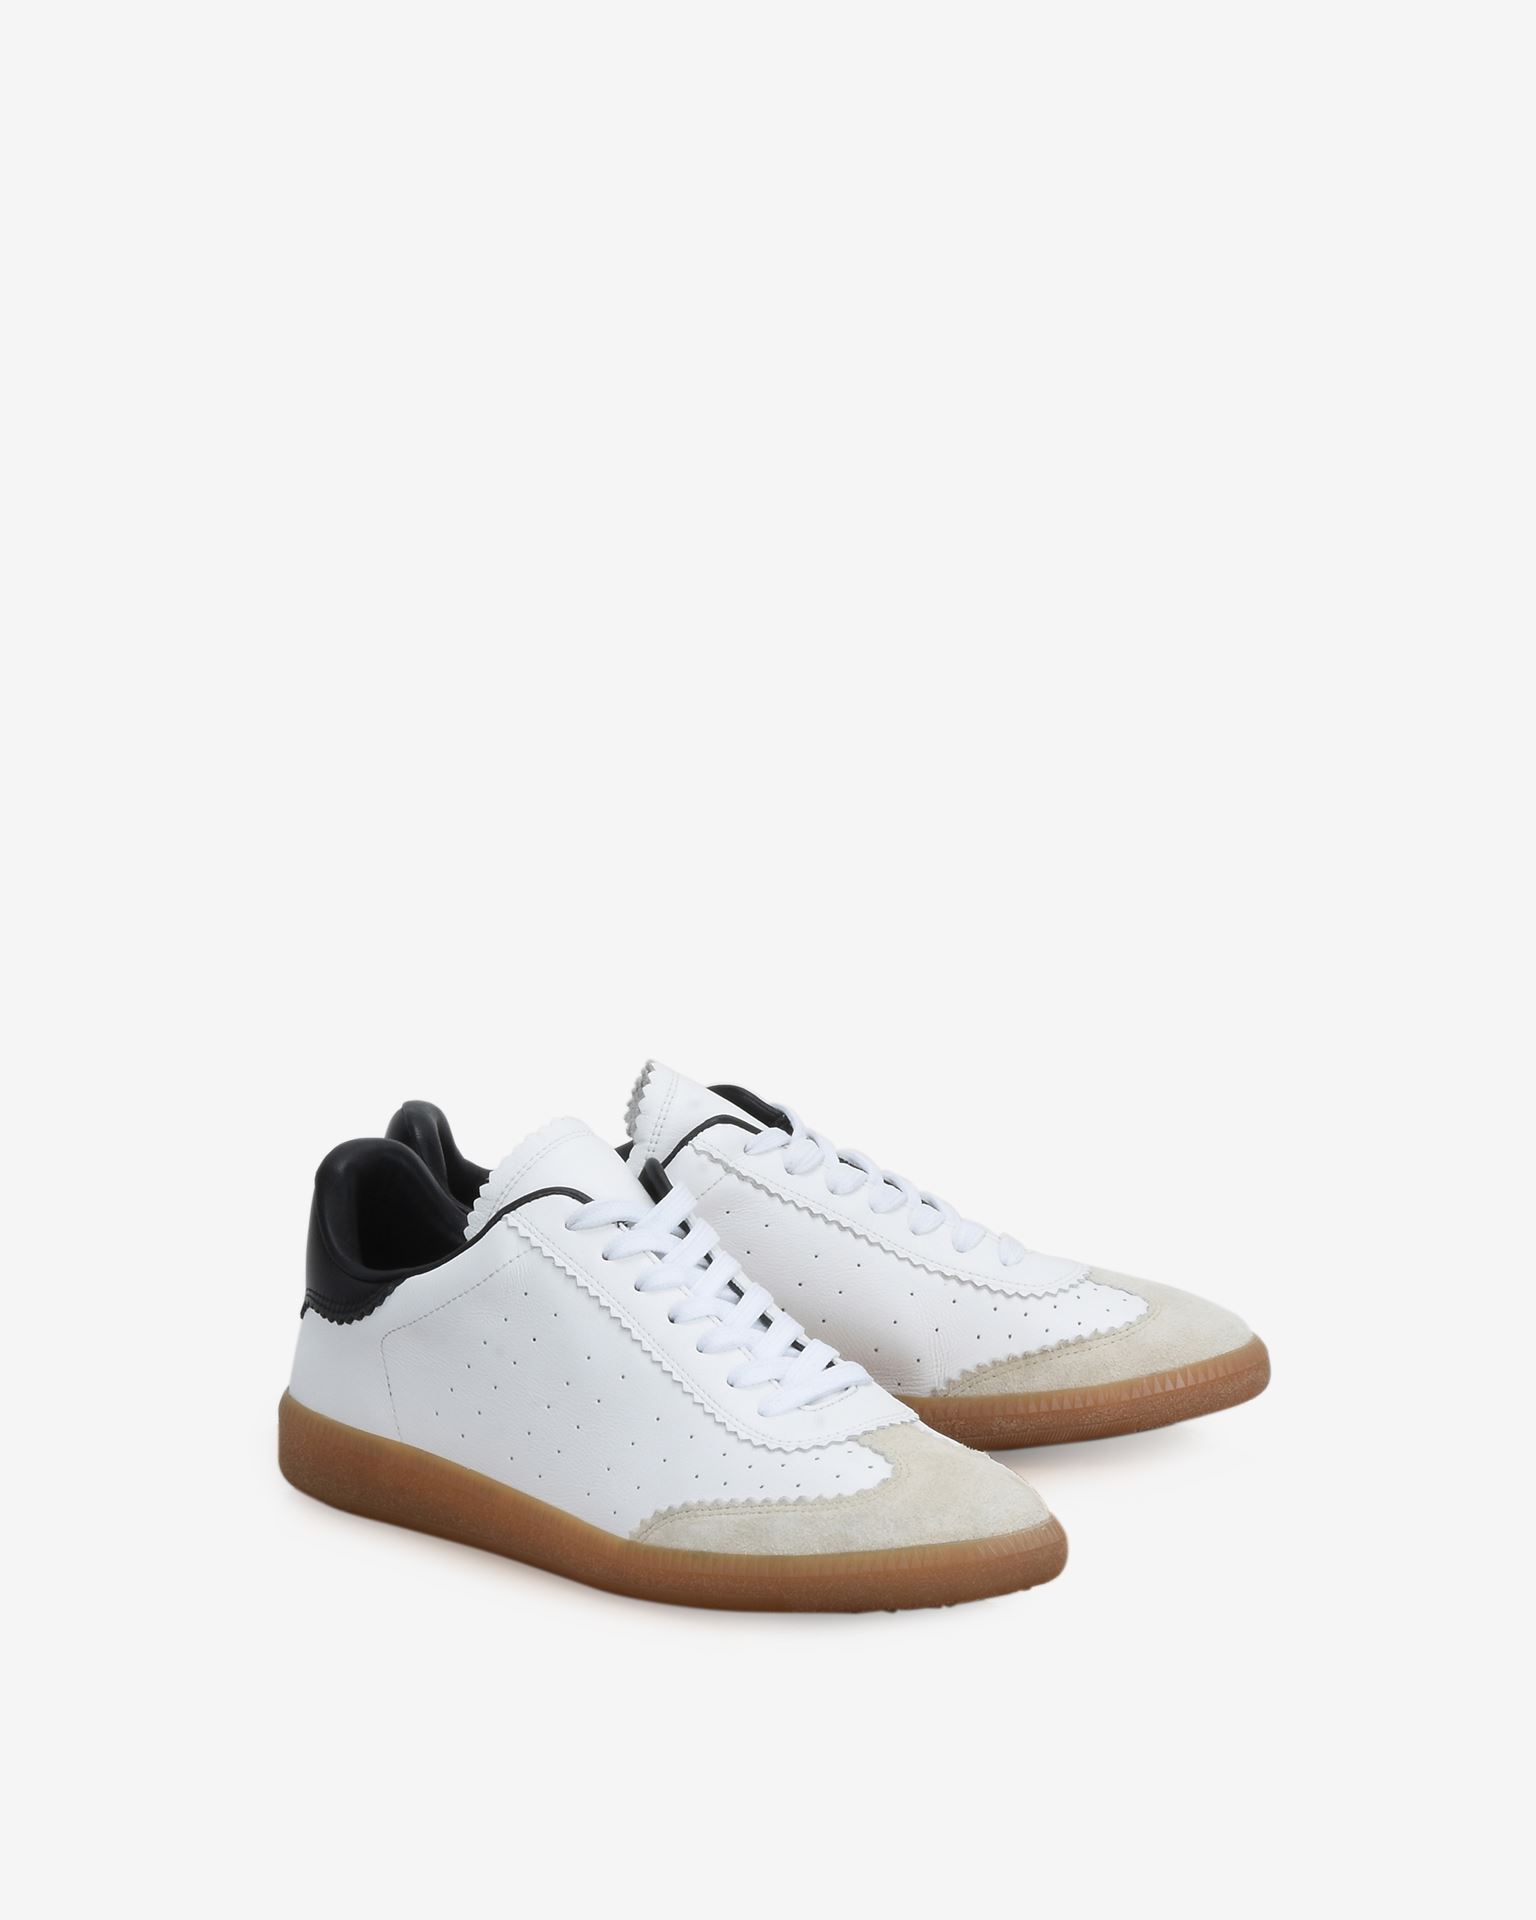 Isabel Marant, Bryce Leather Sneakers - Damen - Weiss